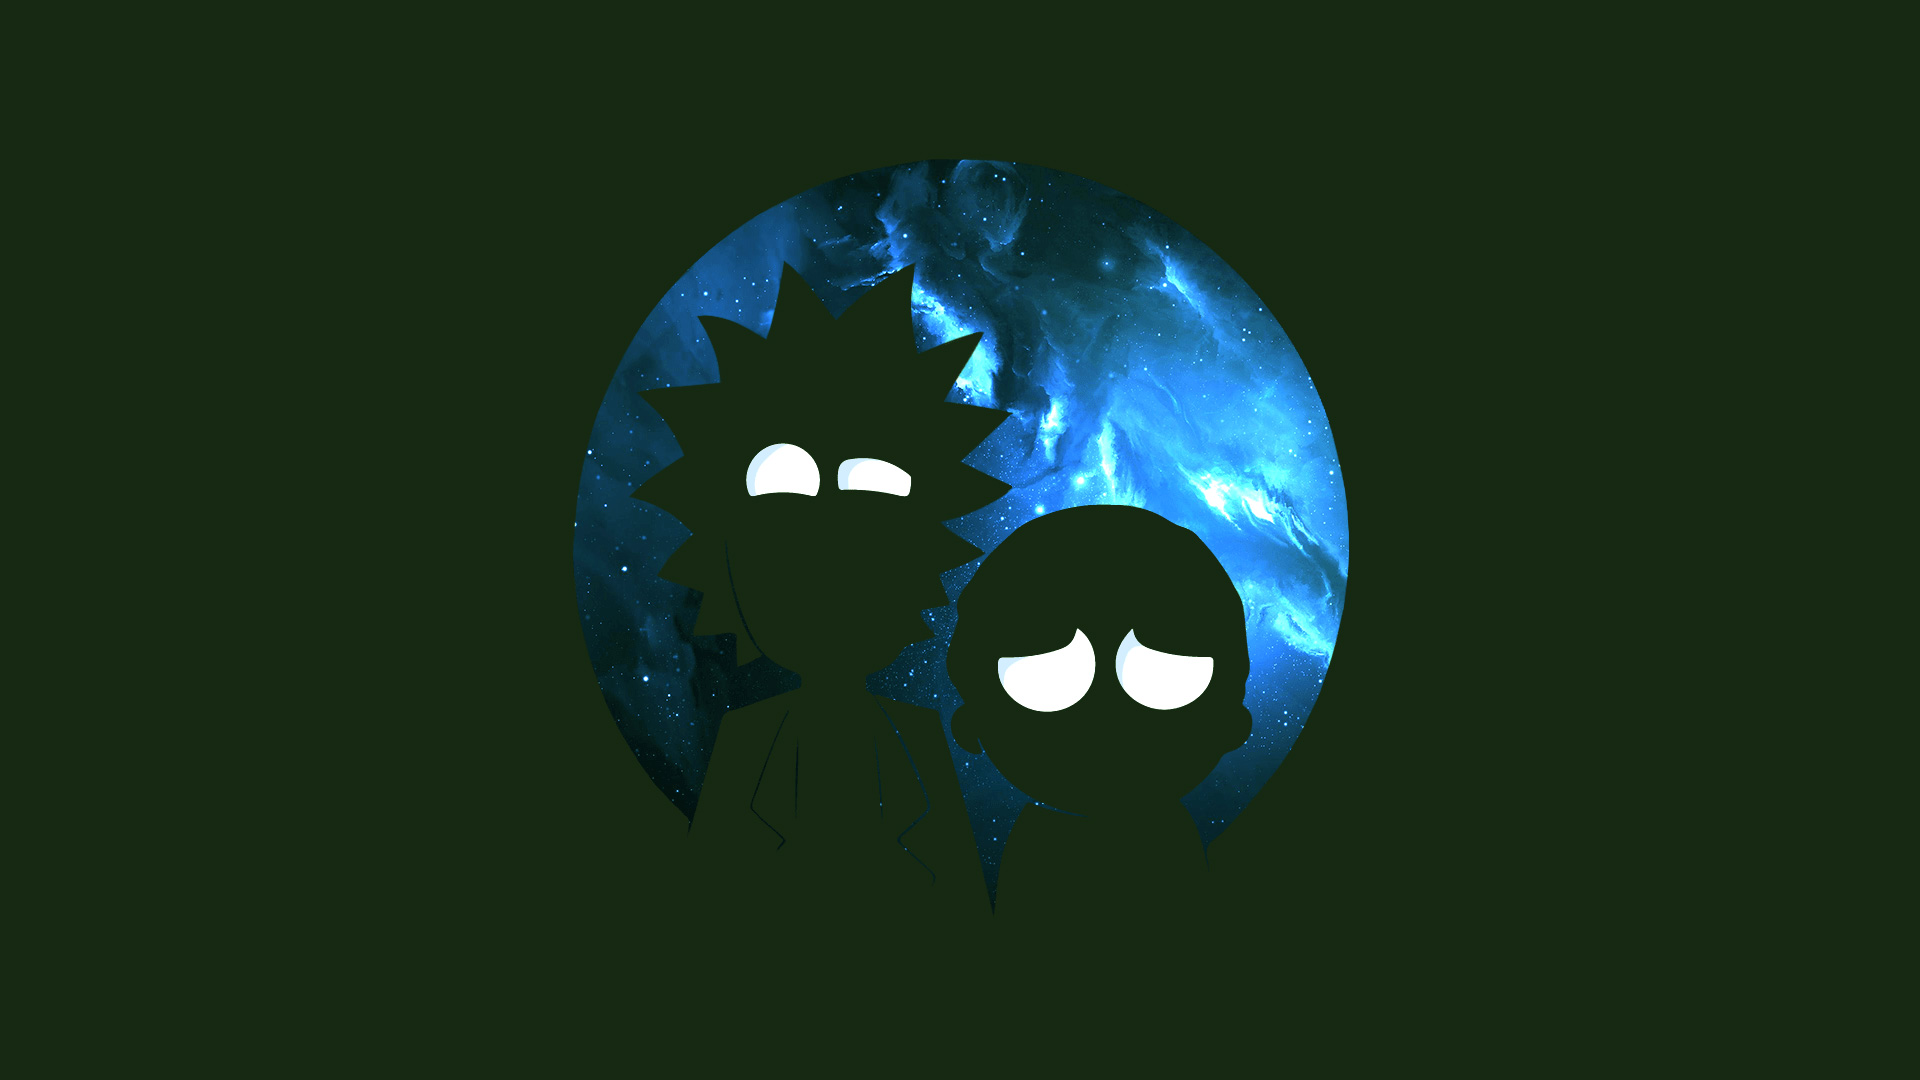 Rick and Morty phone wallpaper collection 154